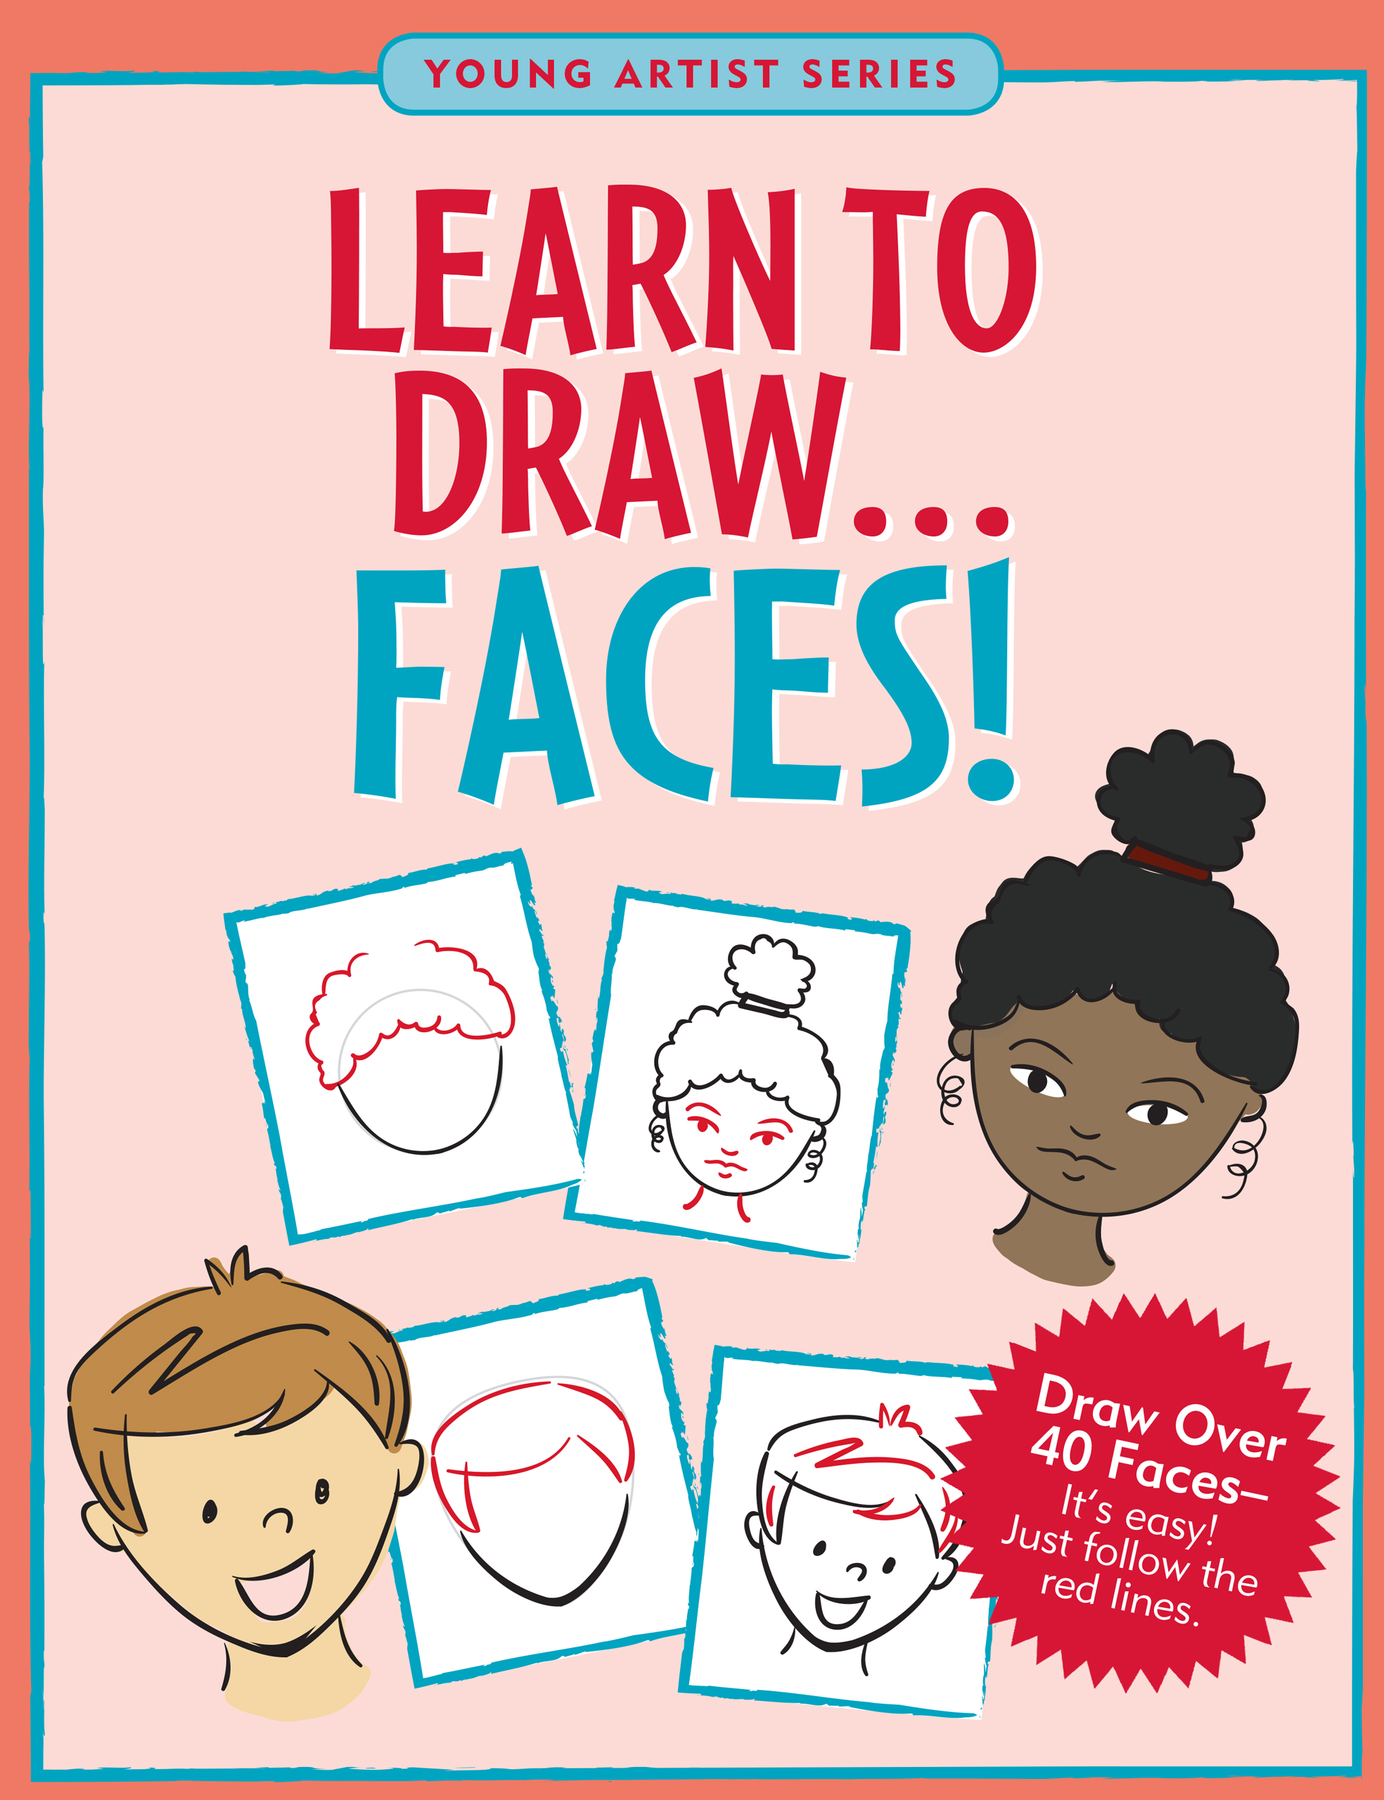 Easy drawing book for kids 5 - 7 (Grid drawing for kids - Faces): This book  teaches kids how to draw faces using grids|Paperback